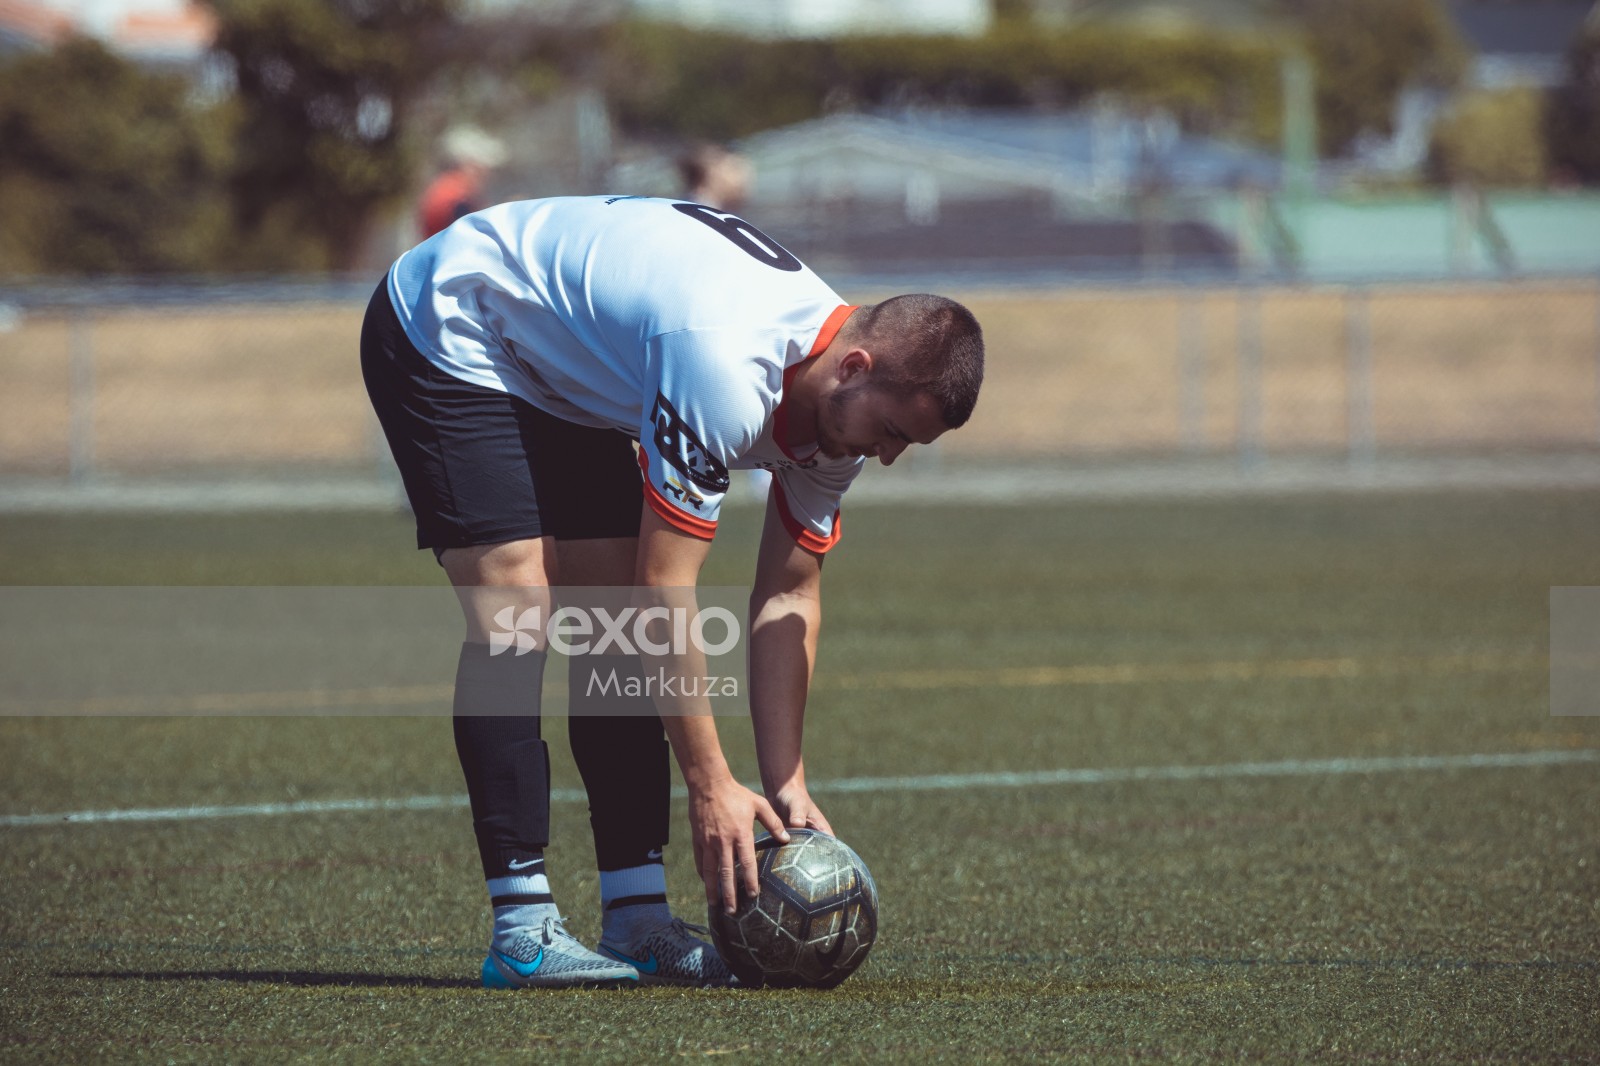 Player setting football on the ground - Sports Zone sunday league